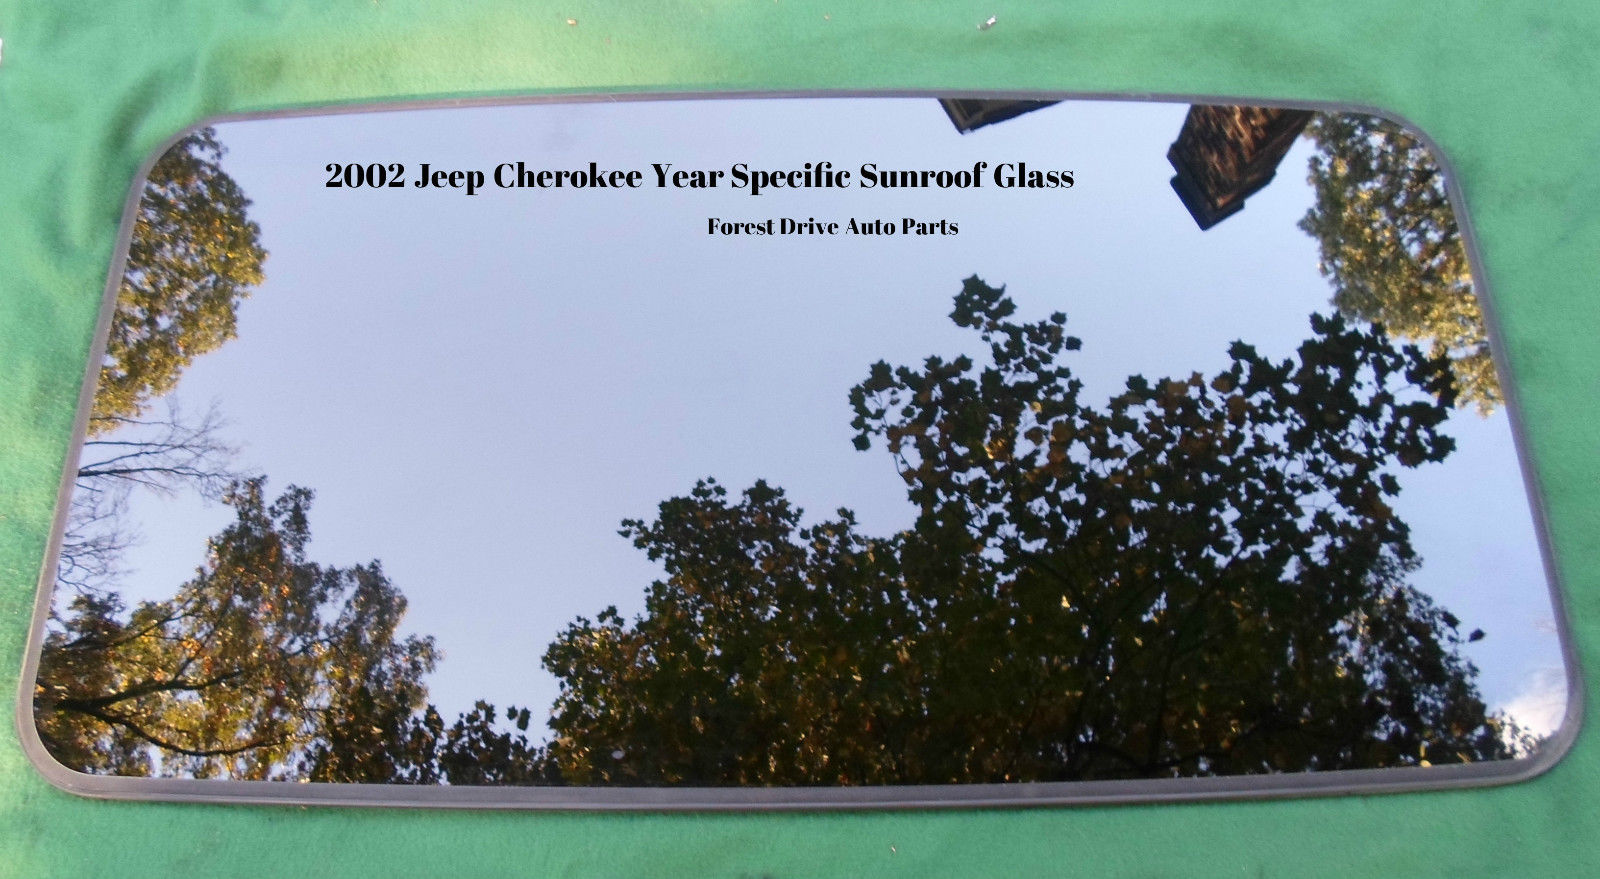 2002 JEEP CHEROKEE OEM YEAR SPECIFIC SUNROOF GLASS 100% NO LEAK  FREE SHIPPING - $153.00